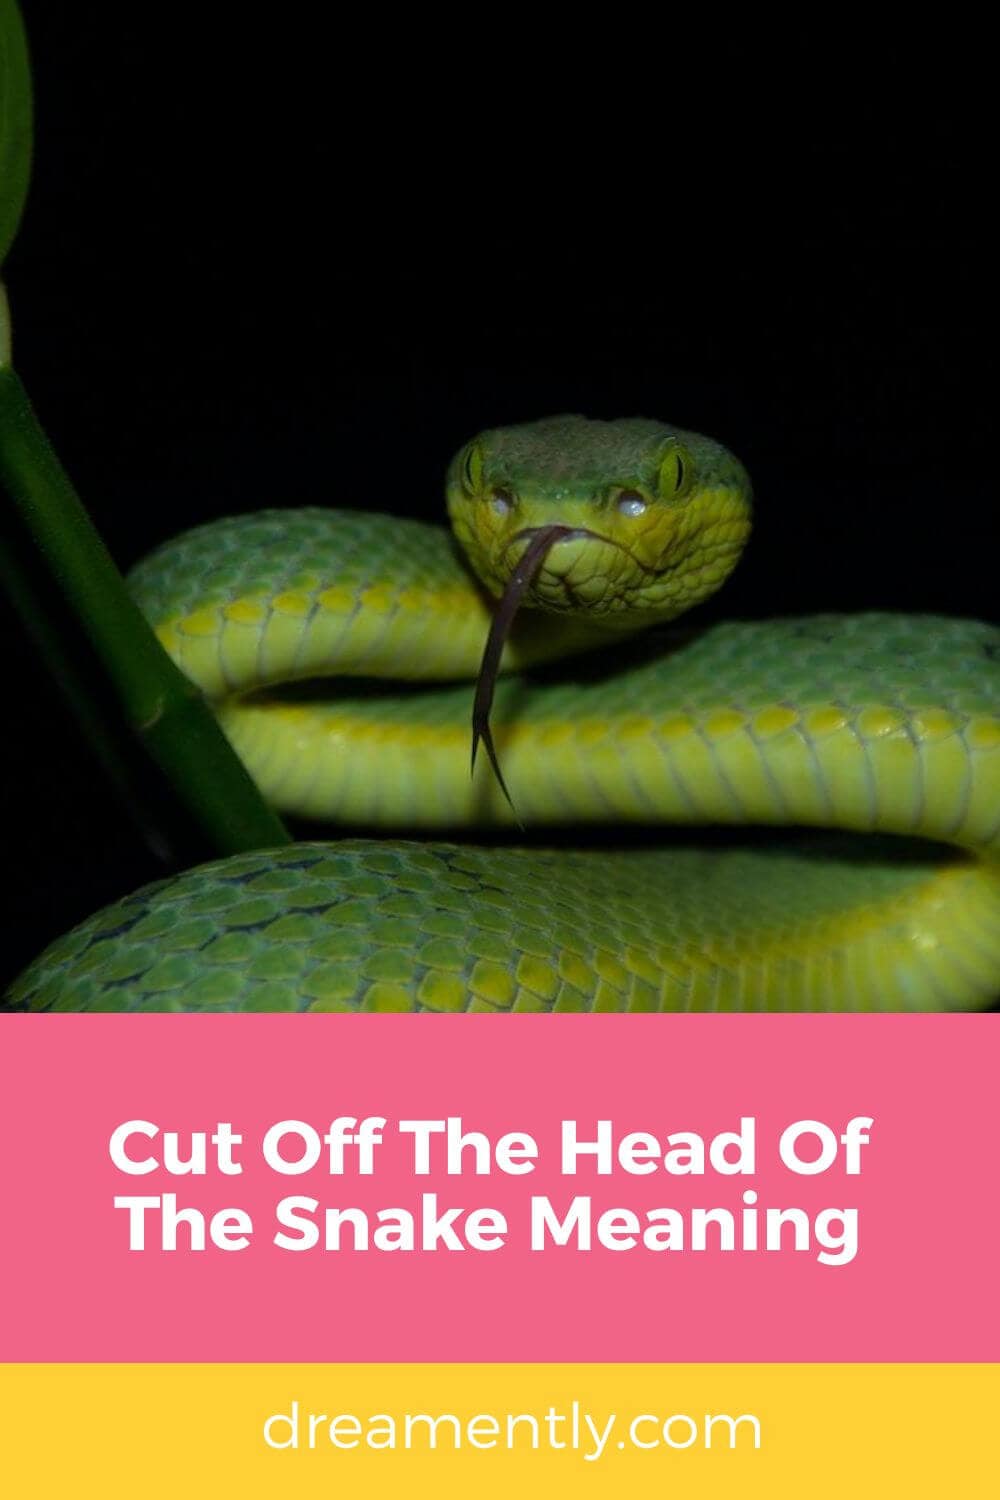 Cut Off The Head Of The Snake Meaning